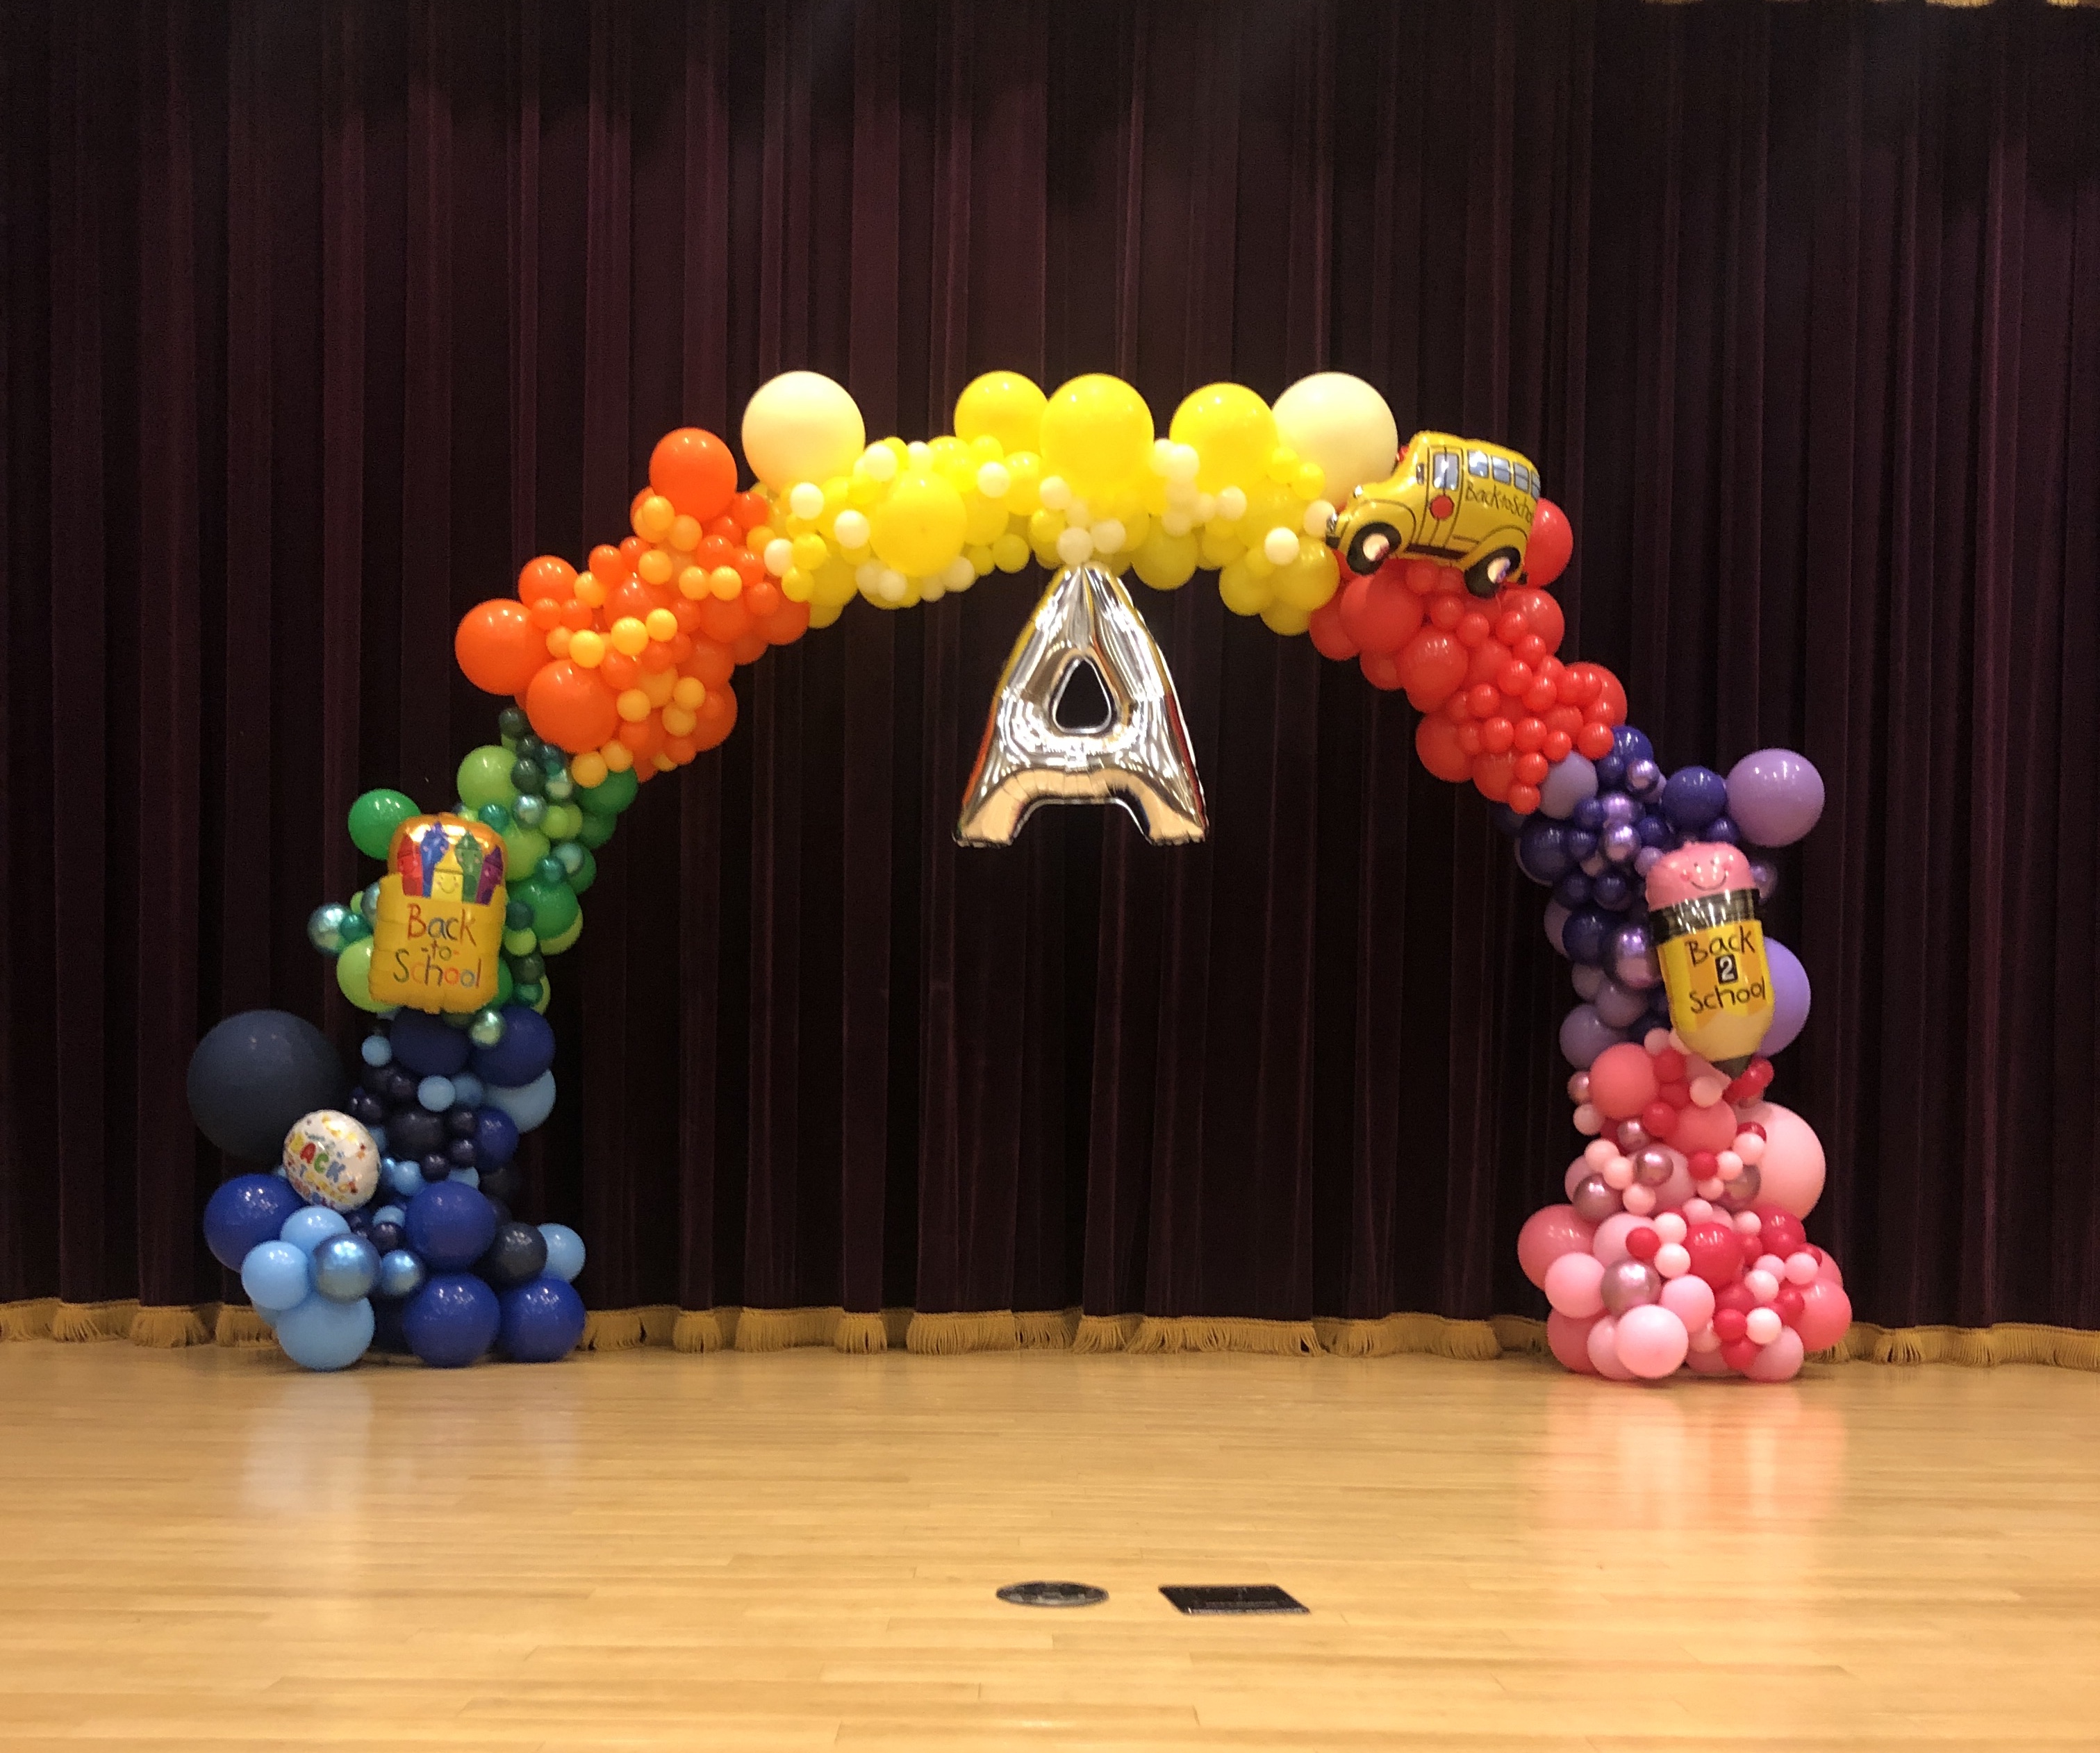 Corporate Balloon Decorations: The Art of Making an Impression